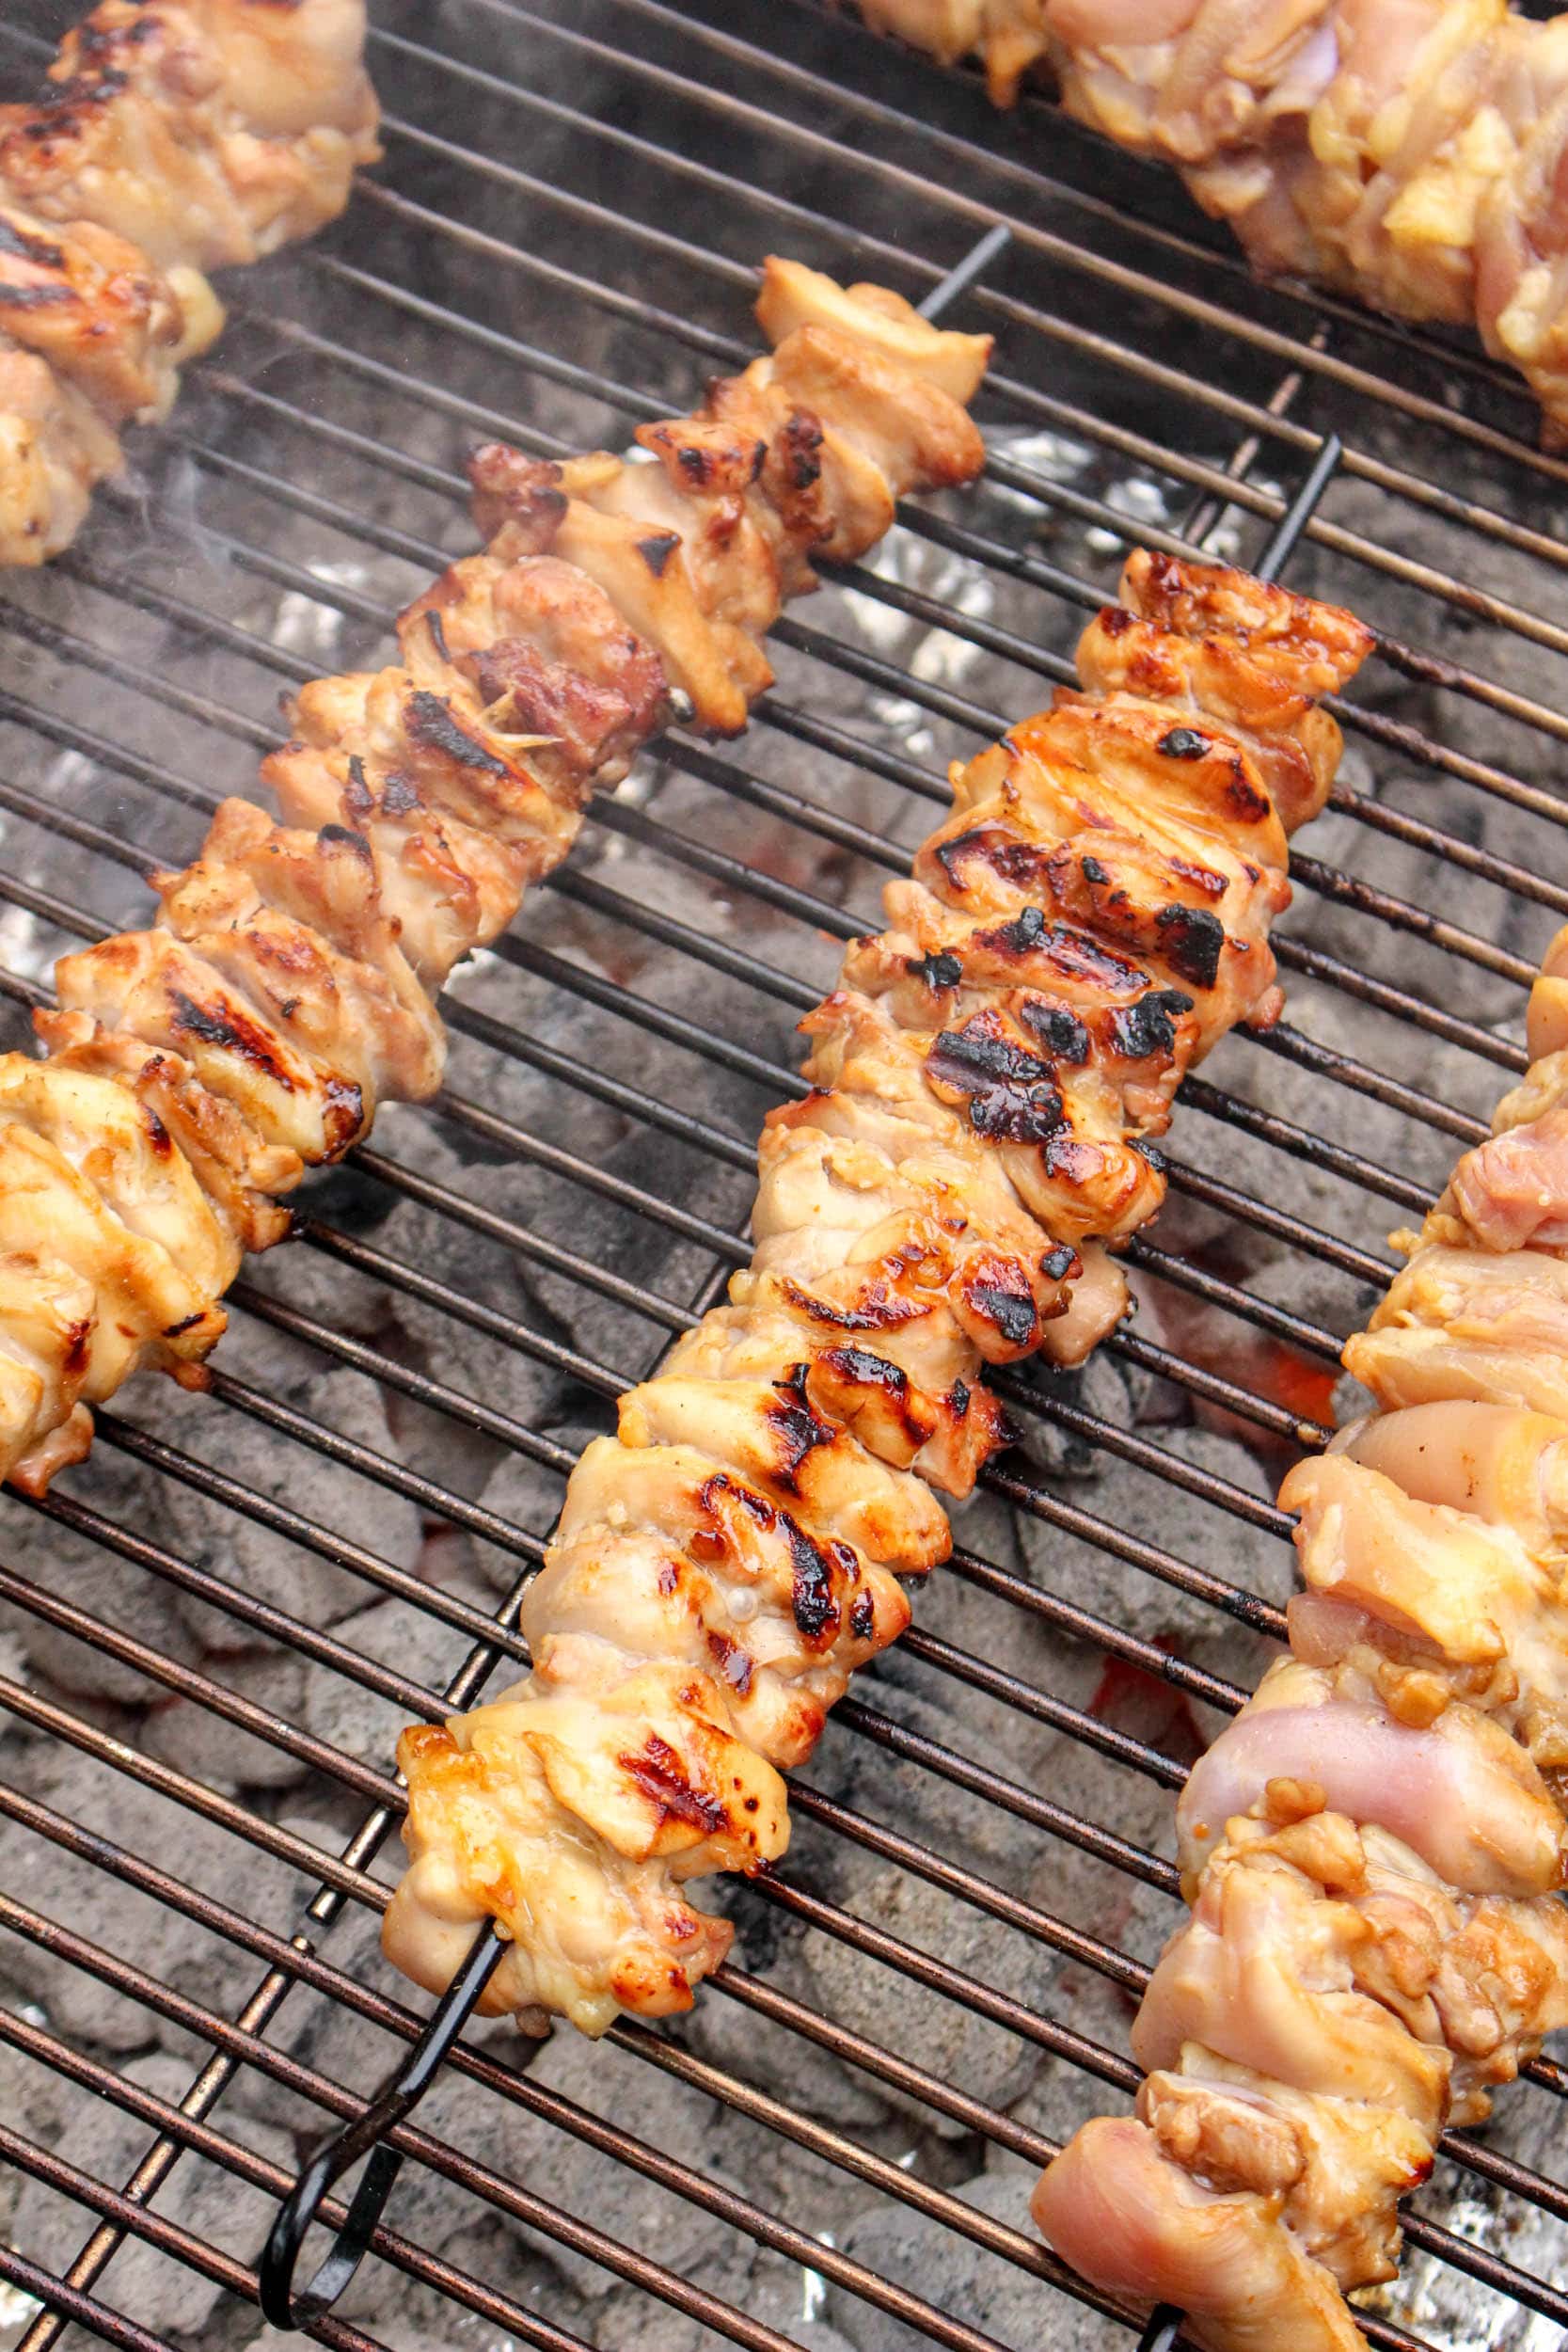 Grilled chicken kabobs on the grill